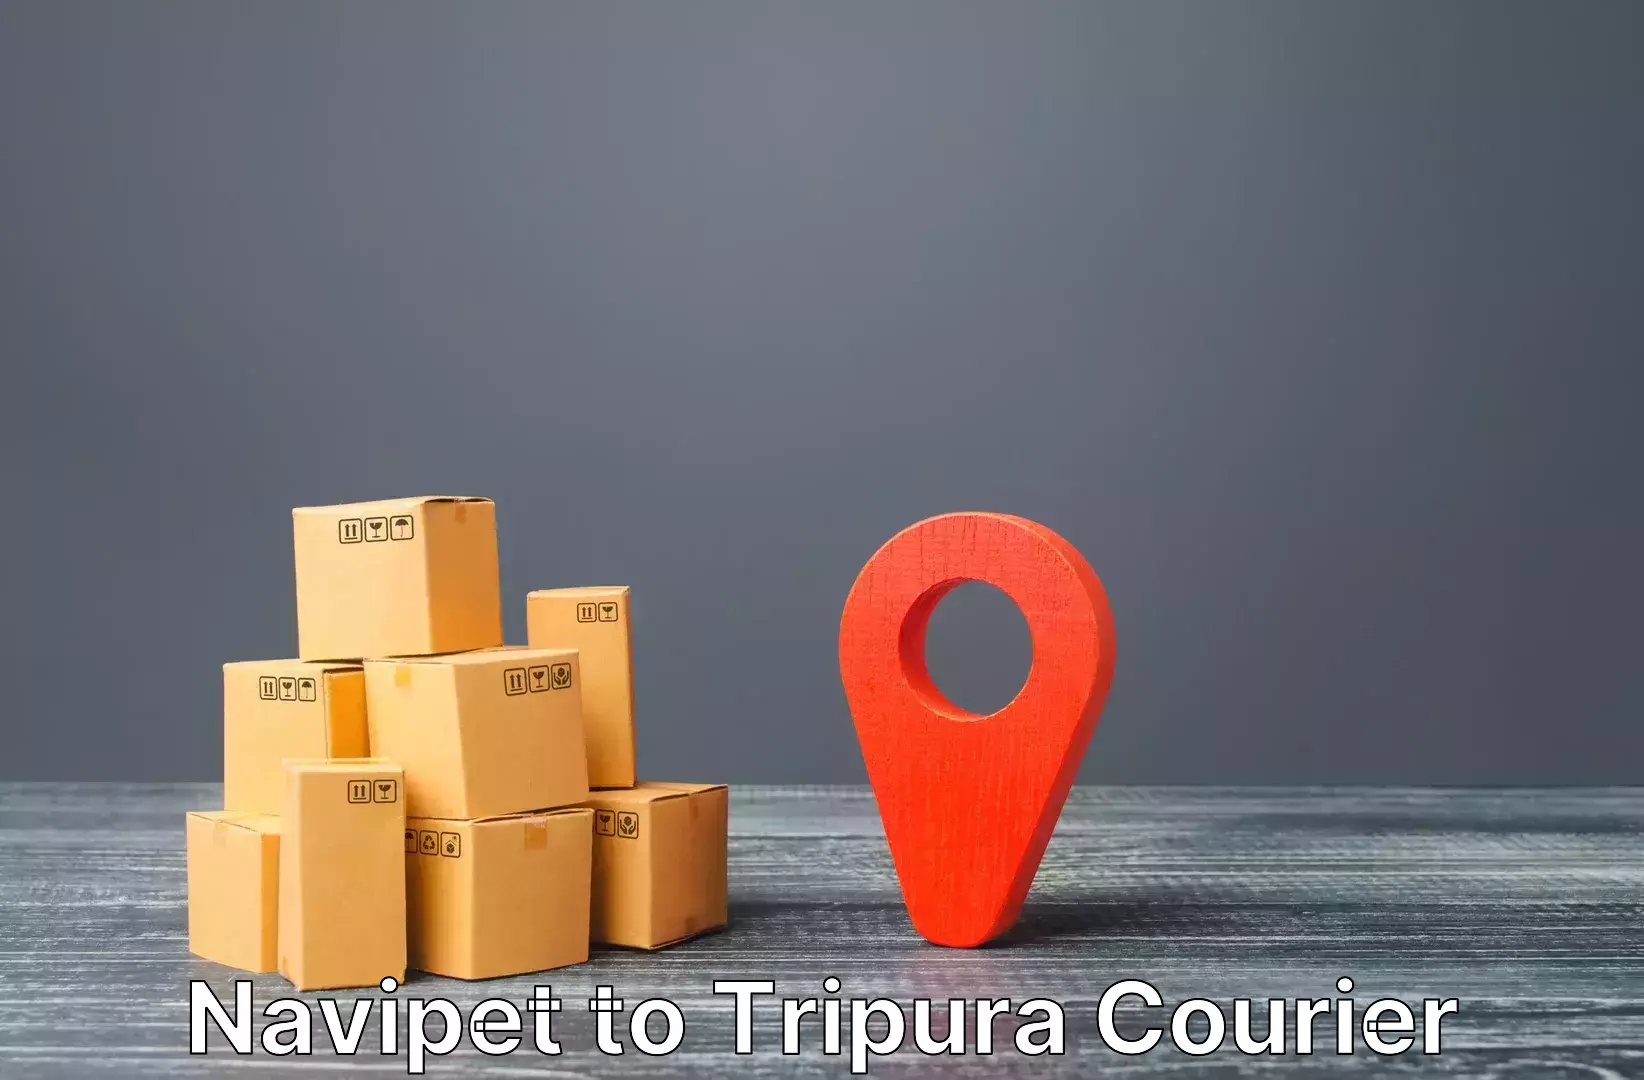 Luggage shipment specialists Navipet to Tripura